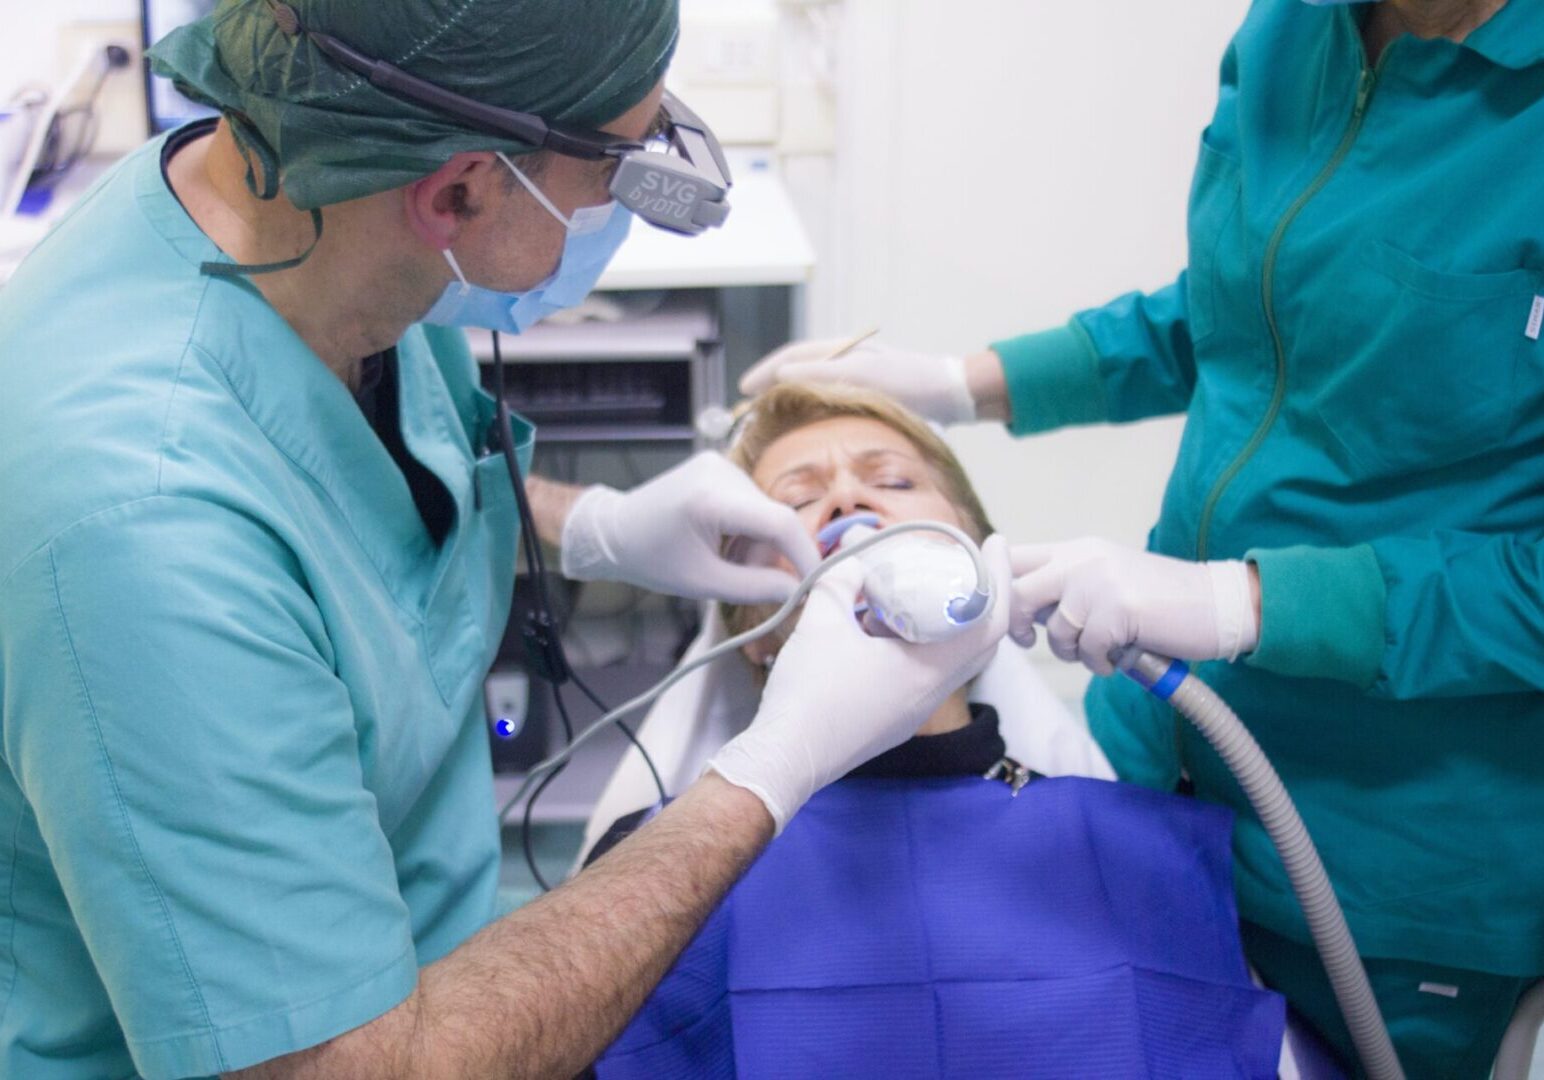 A dentist is using an electric toothbrush to clean the teeth of another person.